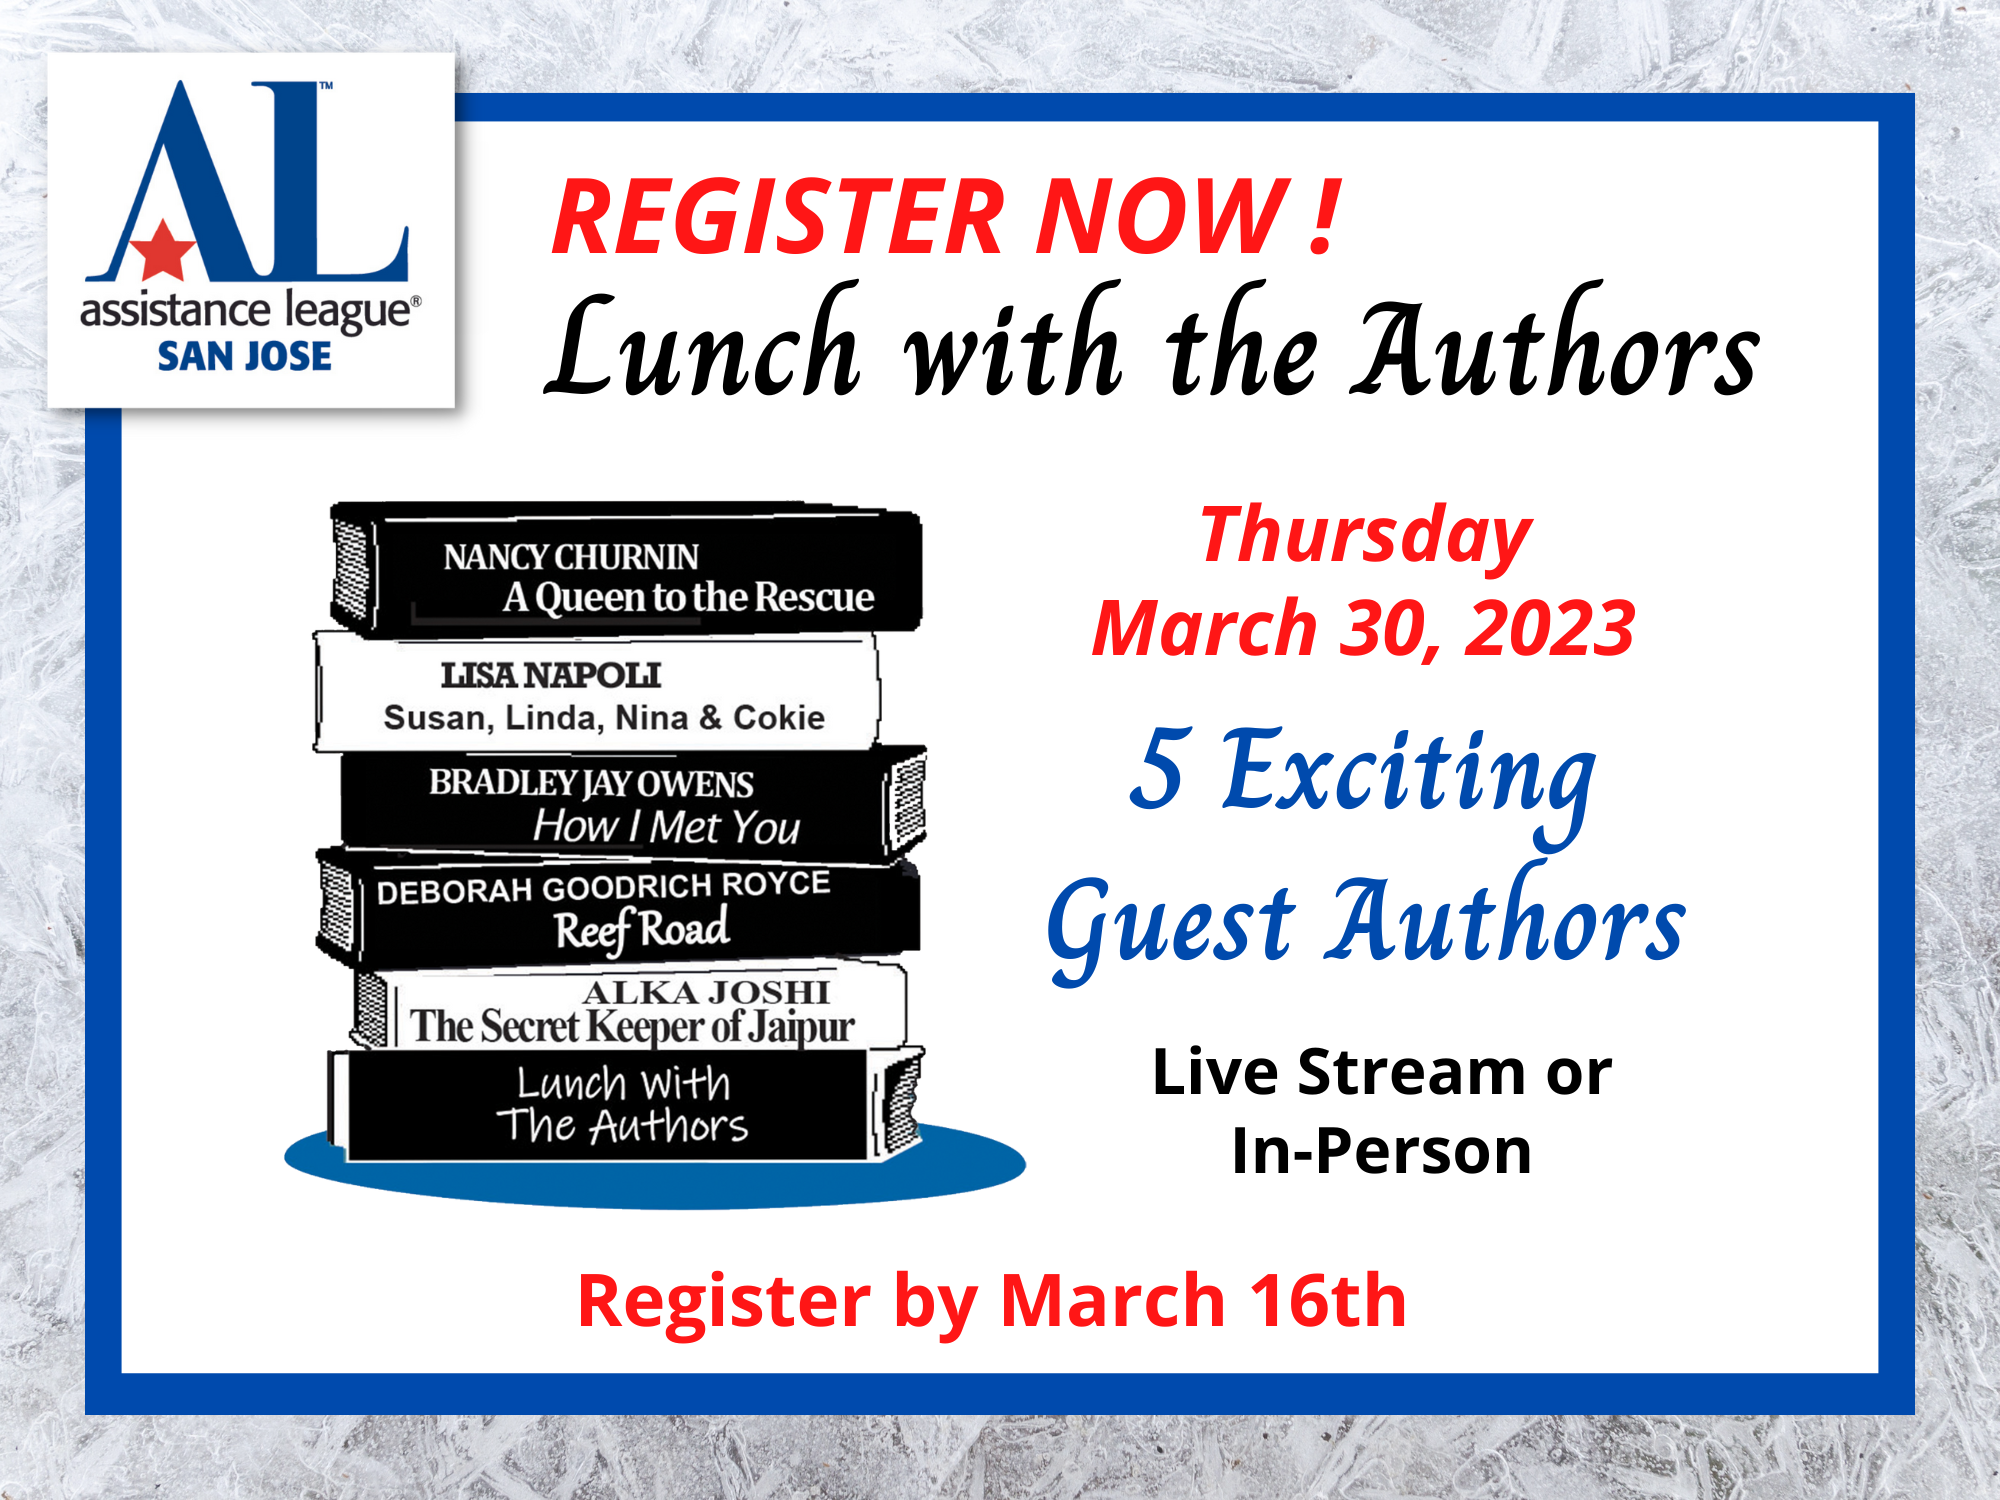 Register Now for Lunch with the Authors